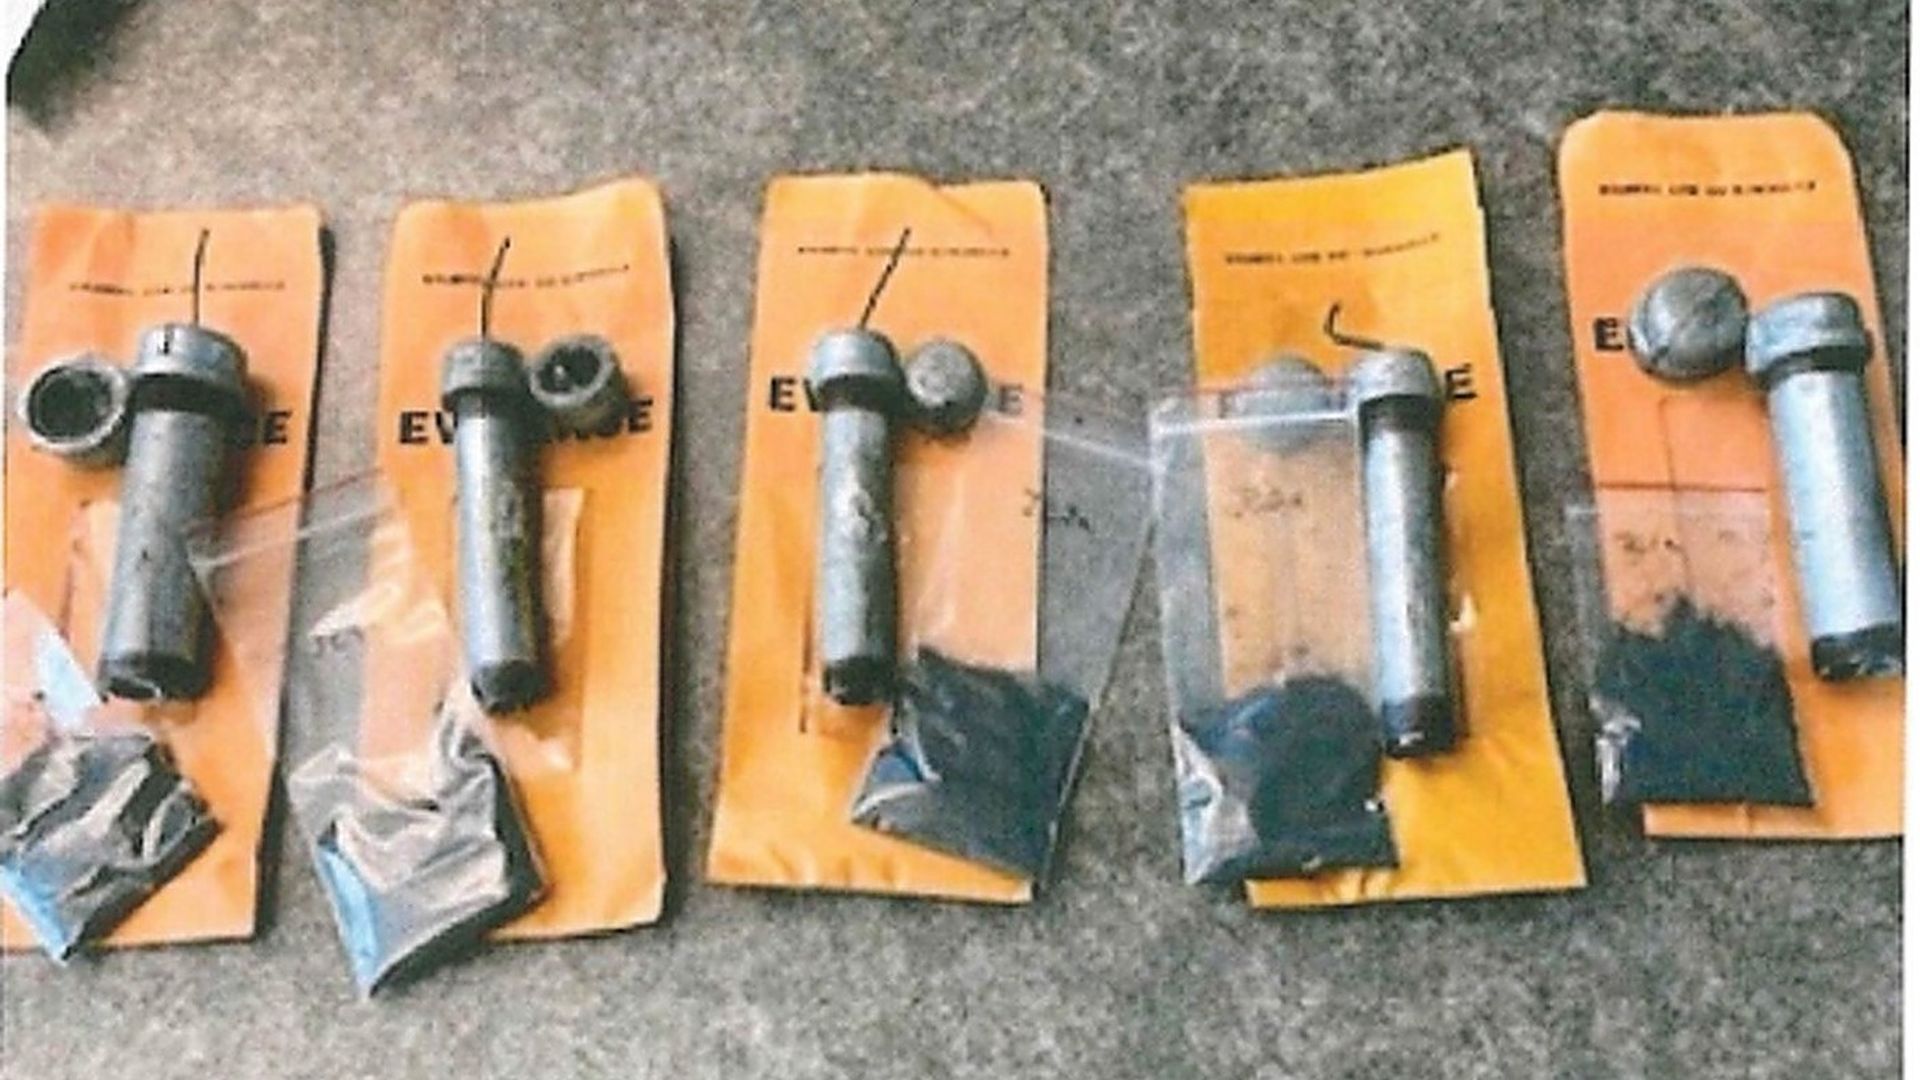 5 improvised explosive devices that the FBI says were fully operational and could cause great bodily harm or injury if handled improperly.